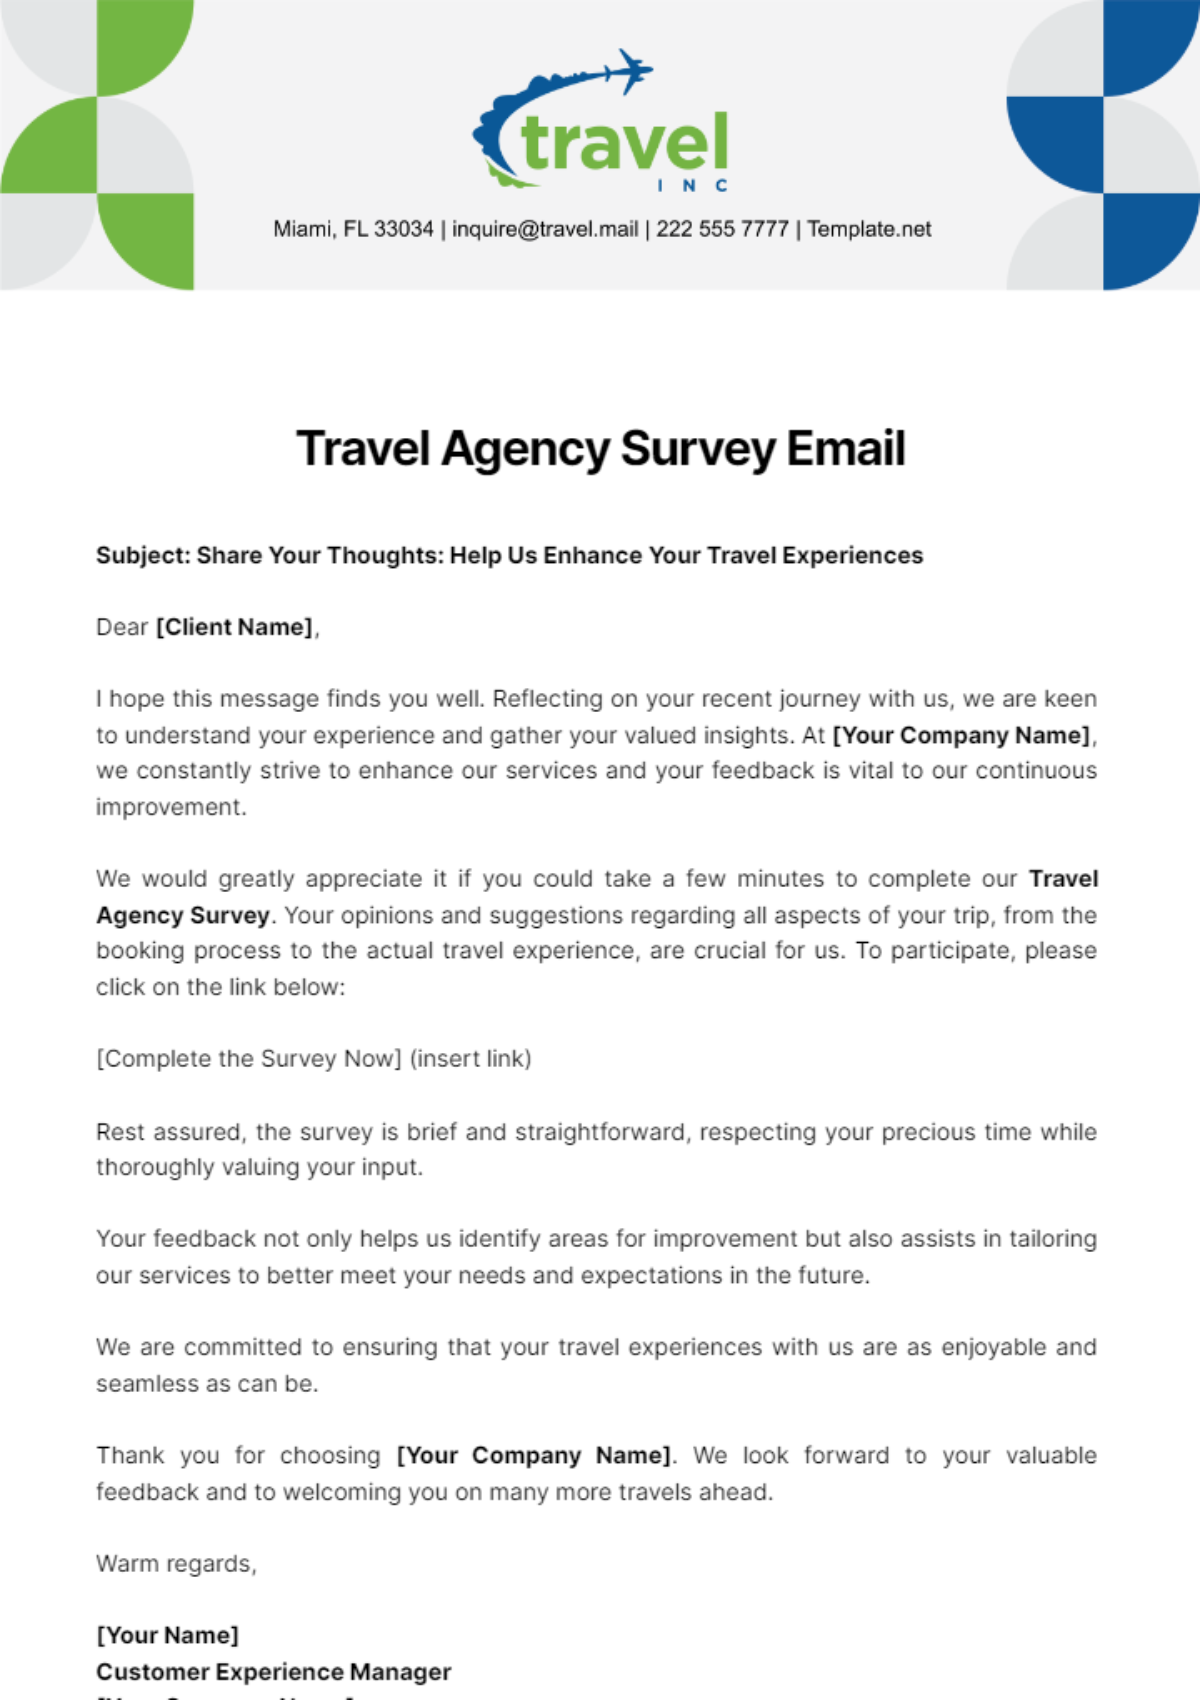 Free Travel Agency Survey Email Template